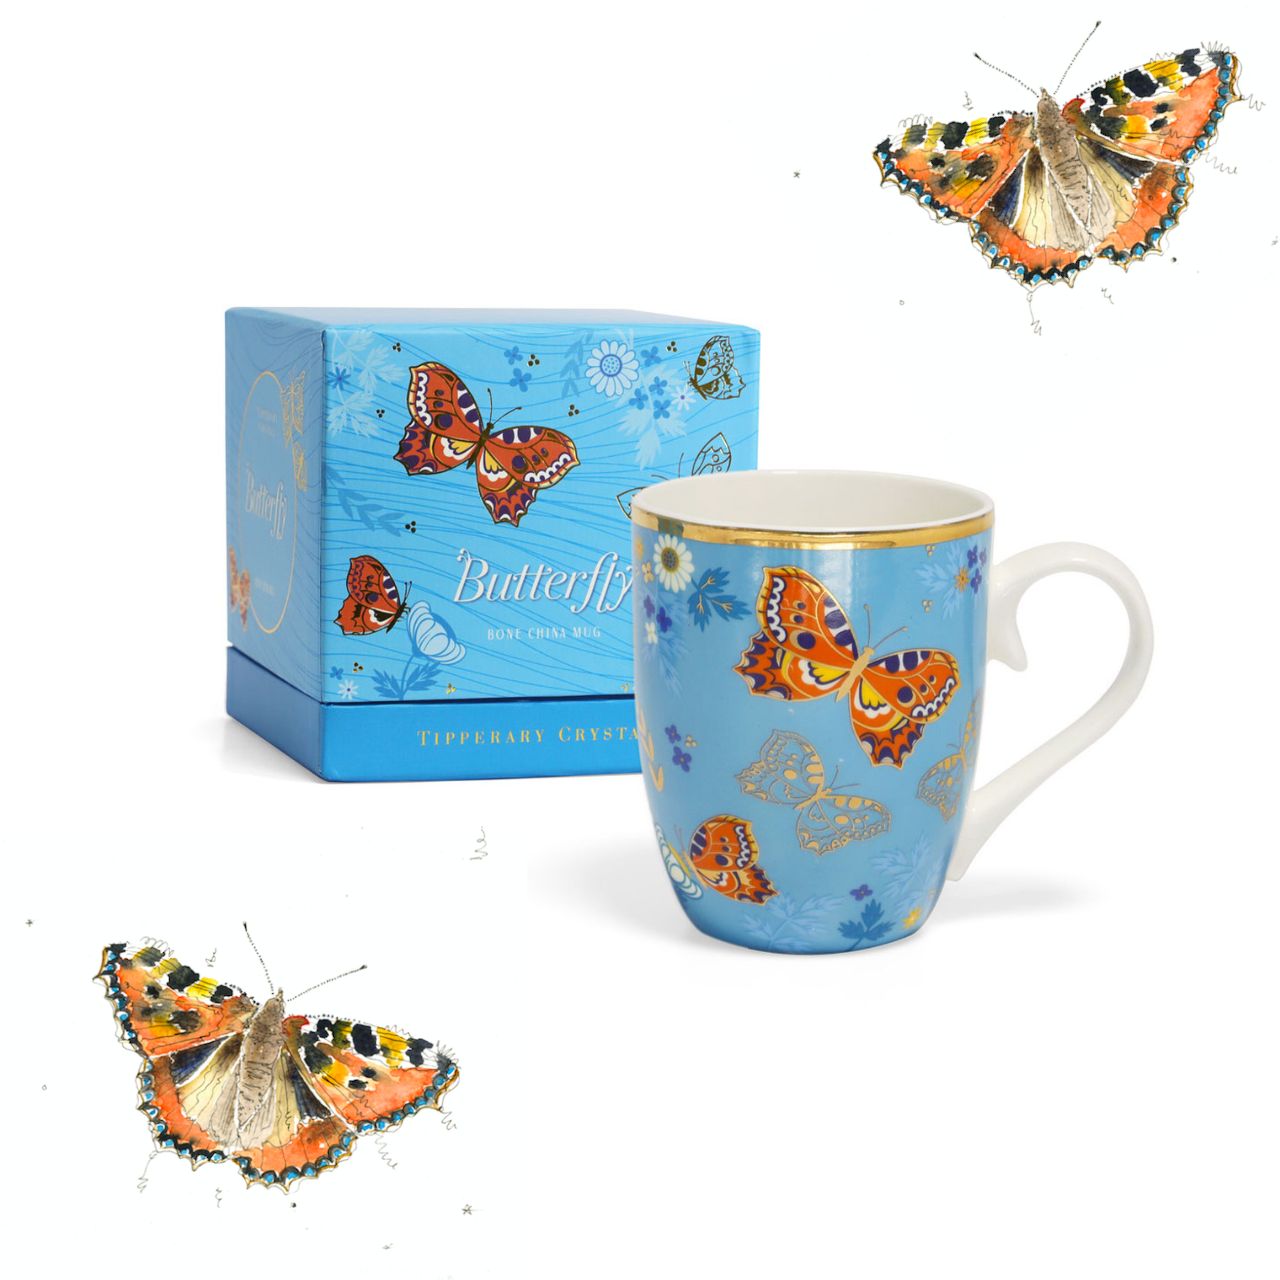 Tipperary Crystal Single Butterfly Mug - The Small Tortoiseshell  Drawing inspiration from urban garden, the Tipperary Crystal Butterfly collection transforms an icon into something modern and unexpected. Playful and elegant, this collection draws from the inherent beauty of the butterfly.